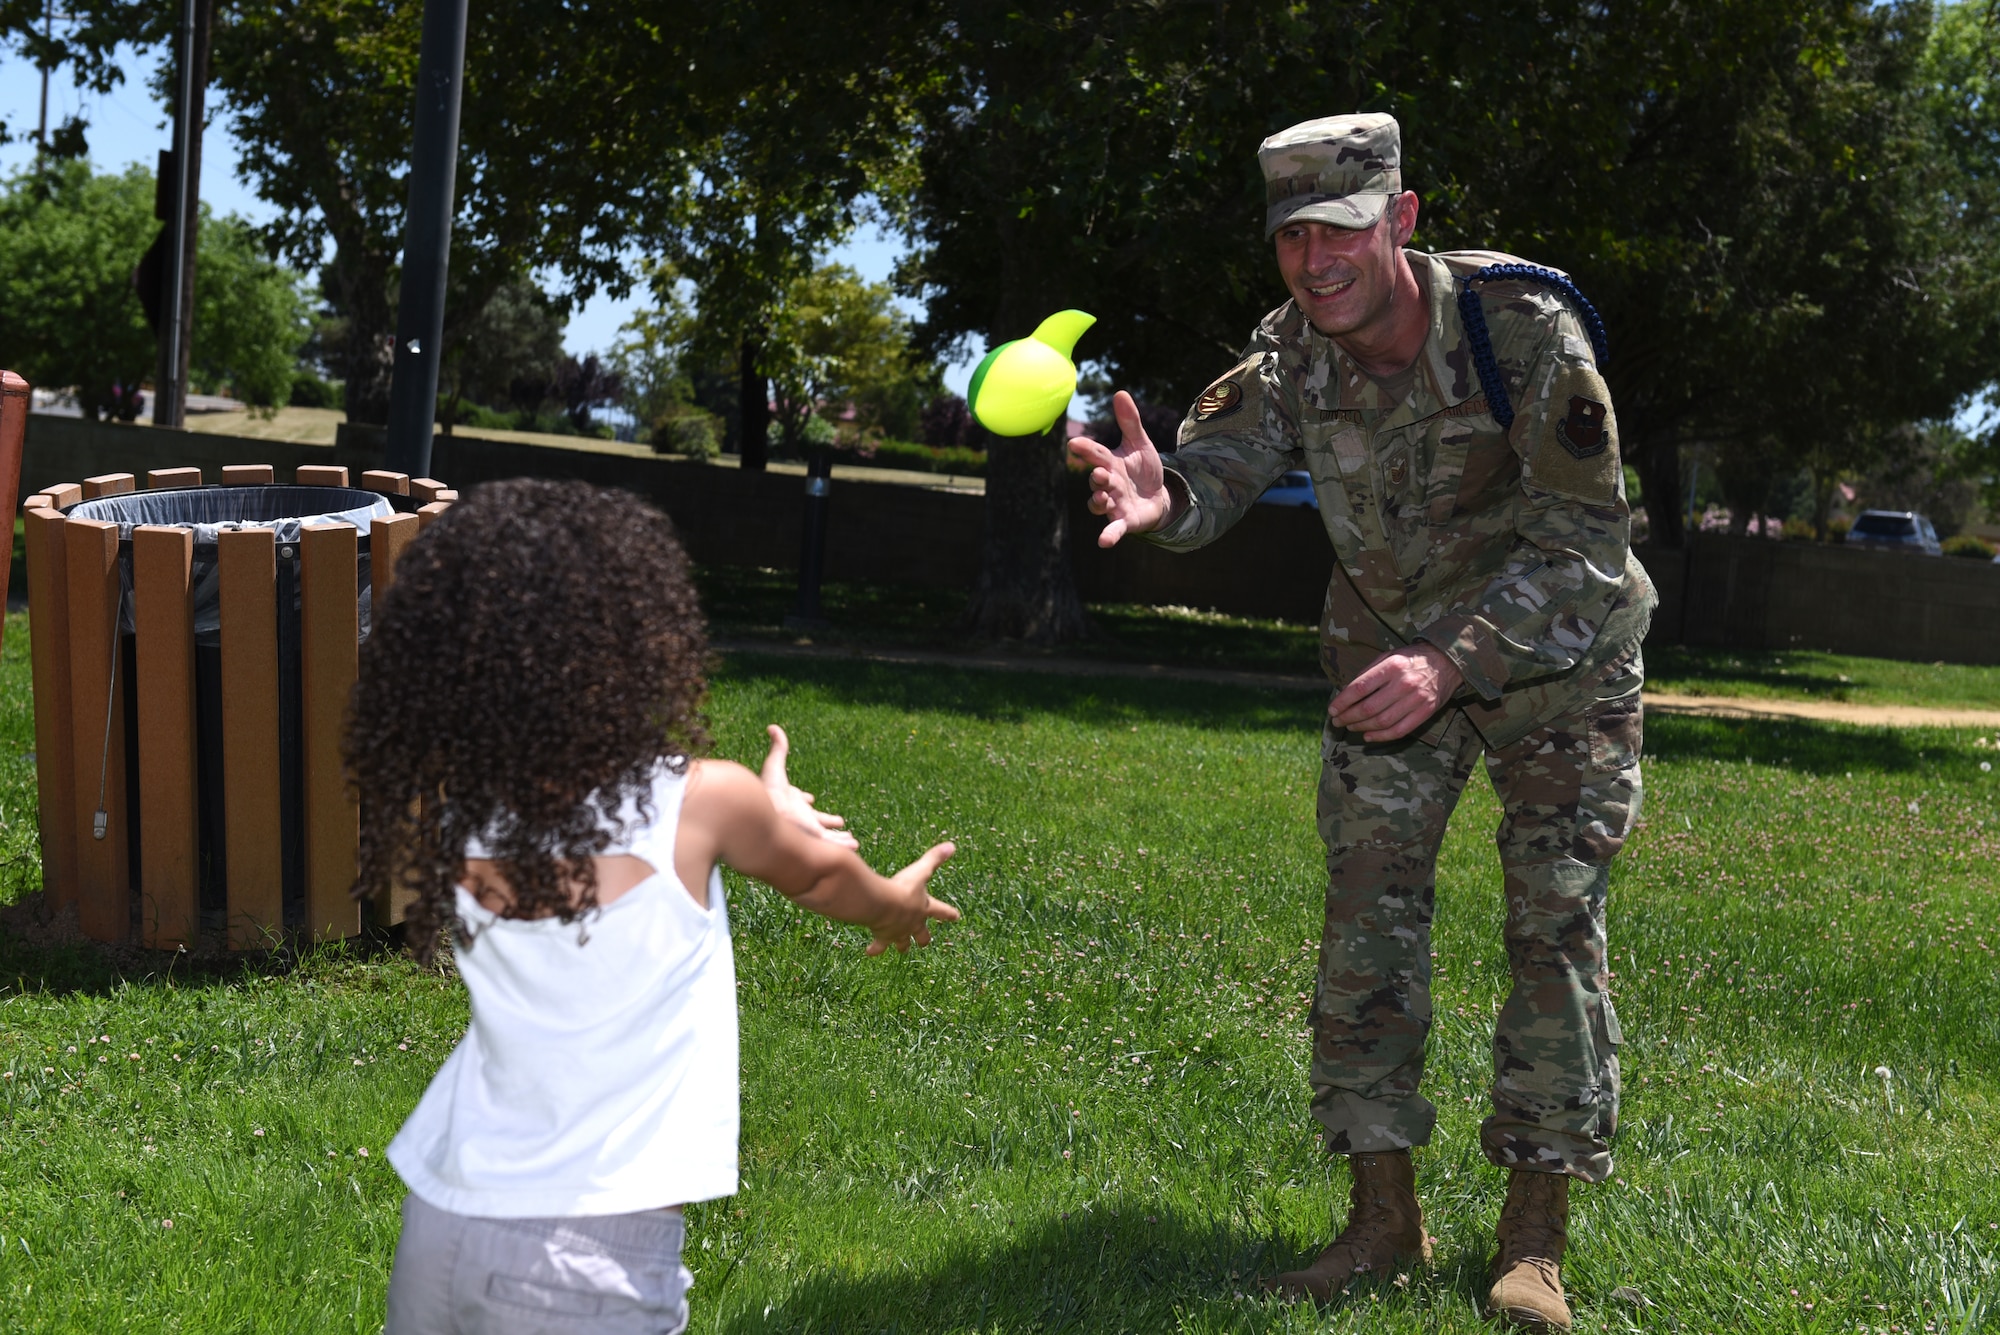 U.S. Air Force Tech. Sgt. Joshua Cunico, 373rd Training Squadron military training unit flight chief, plays catch with his daughter, Rowan, 3, June 12, 2019, at Travis Air Force Base, California. Cunico and his family cherish Father’s Day this year because they get to spend it together. Cunico has deployed twice since becoming a dad in 2014. (U.S. Air Force photo by Airman 1st Class Cameron Otte)